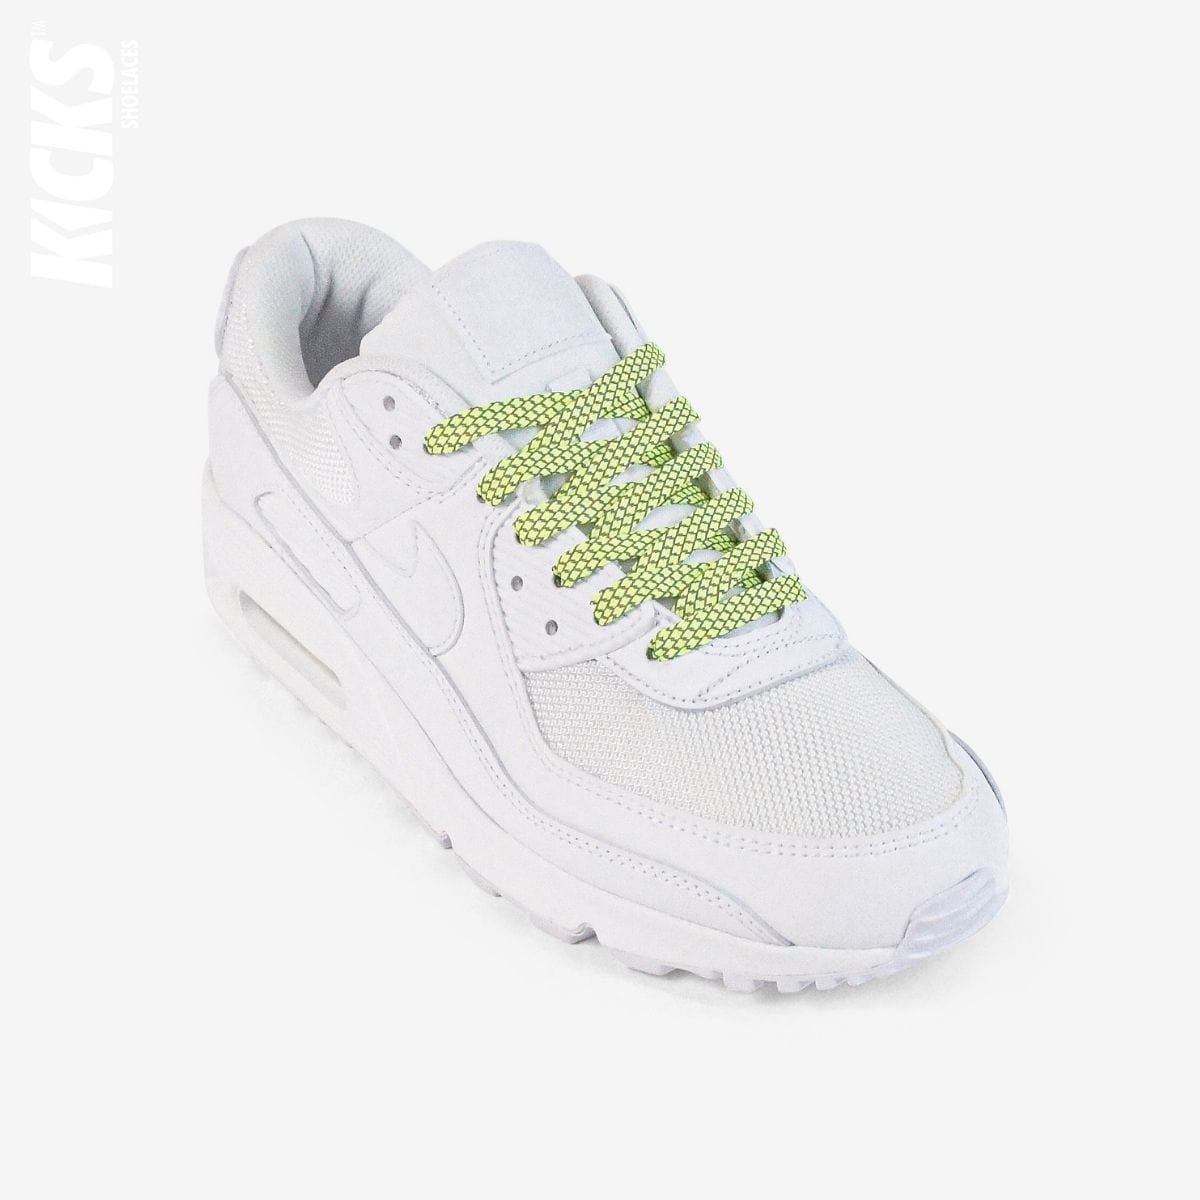 fluorescent-green-reflective-colored-shoelaces-on-white-sneakers